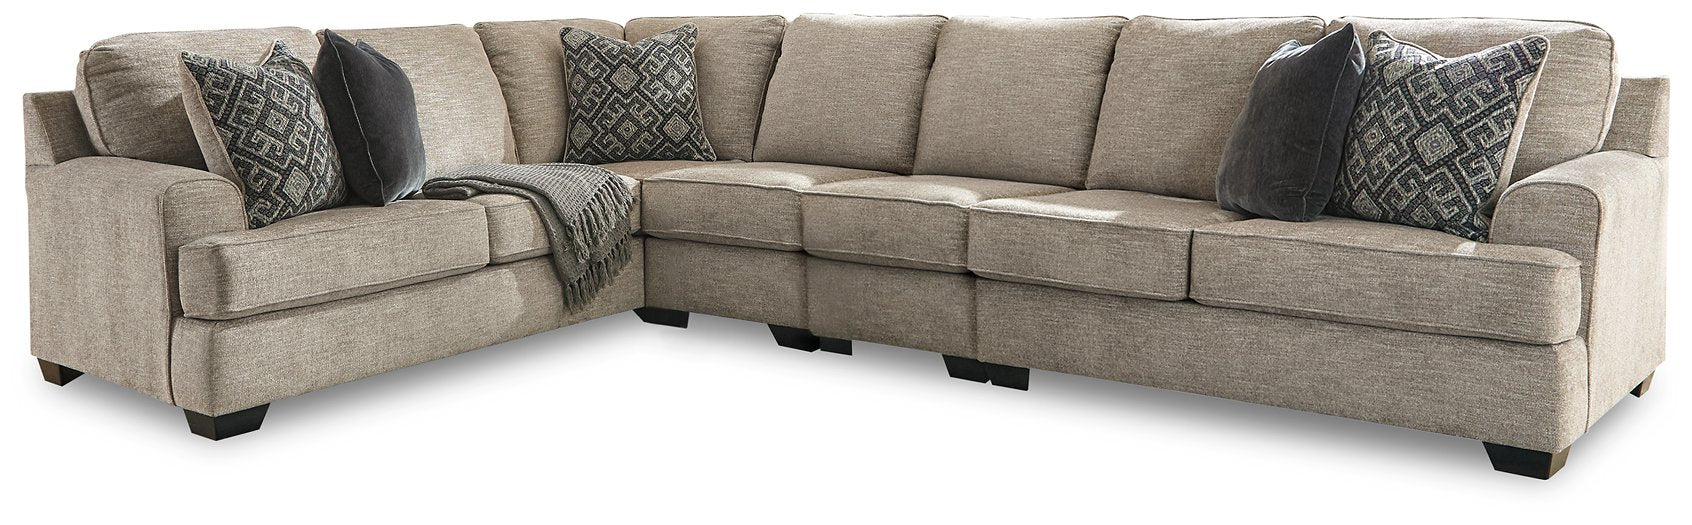 Bovarian Stone 4-Piece Sectional